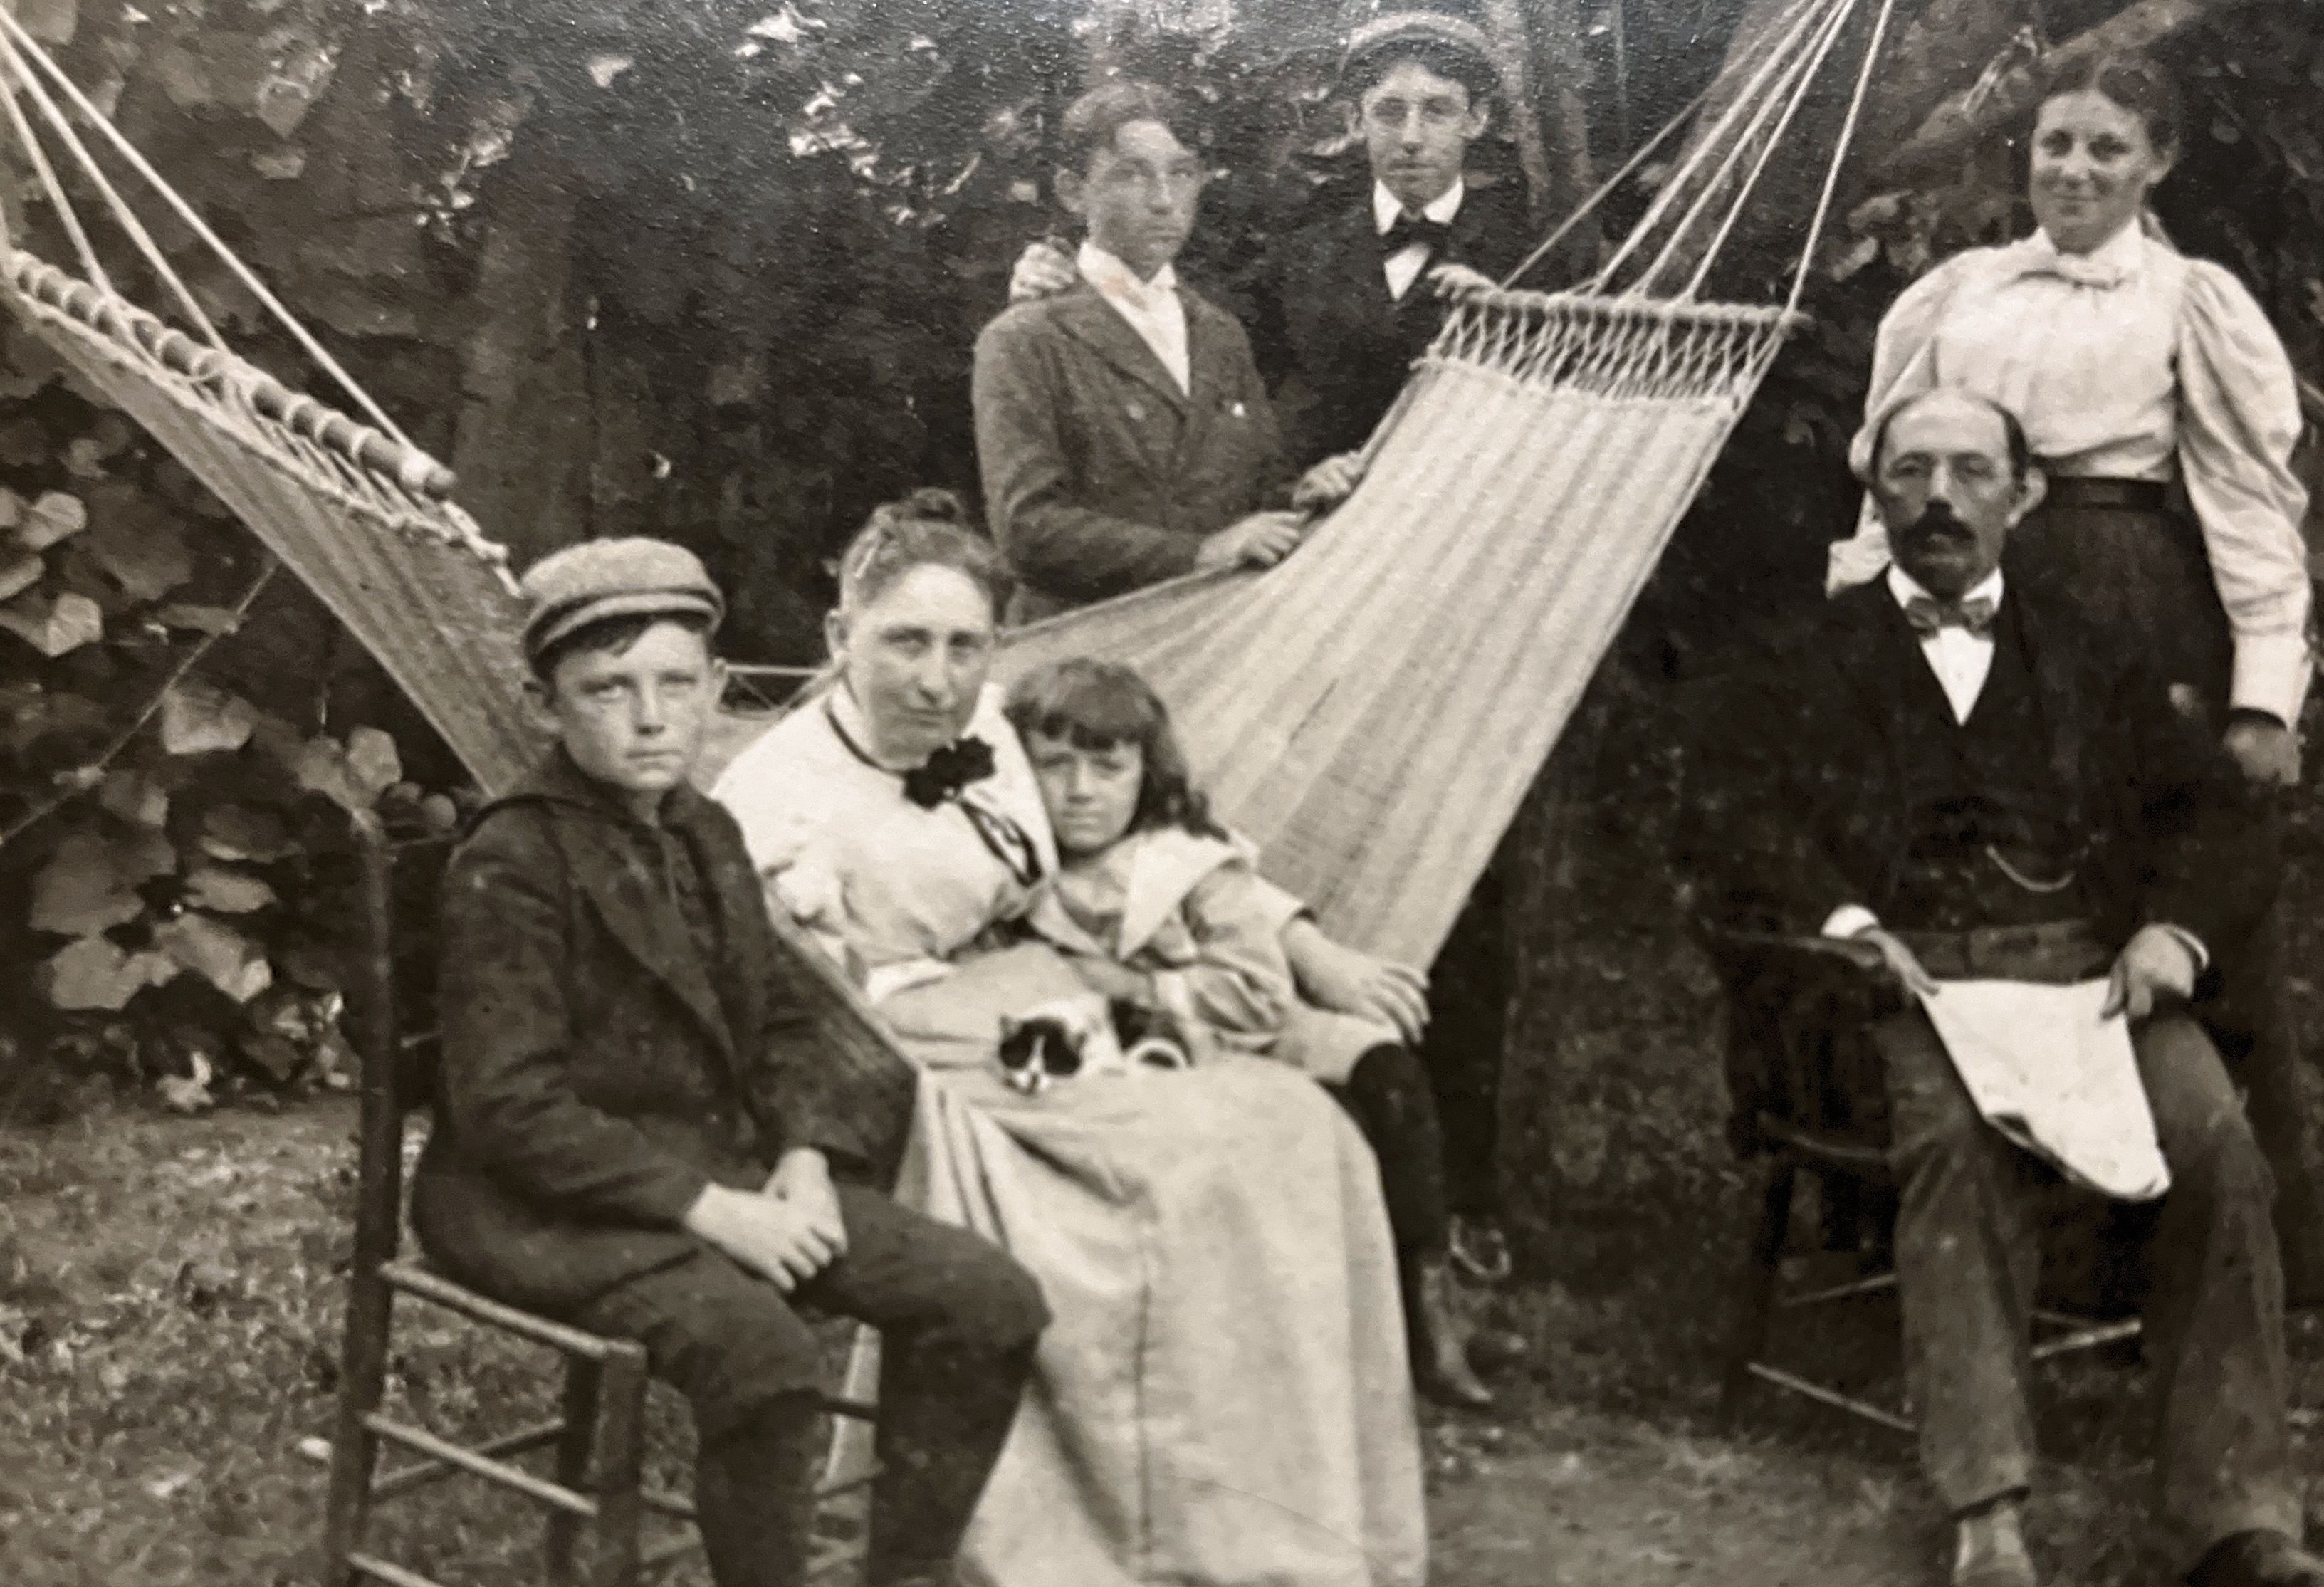  The man seated on the right is Thomas Thompson (?) Allan,  Grandpa’s (Kenneth T’s) dad.  Lady behind him is, Helen, his sister(20),  one of the boys behind the Hammock is James (18), the other, William (16).  His mom, Catherine Nesbit Allan is seated on the hammock.  The boy next to her is Douglas (13) and the young child with the long hair is Grandpa (6).